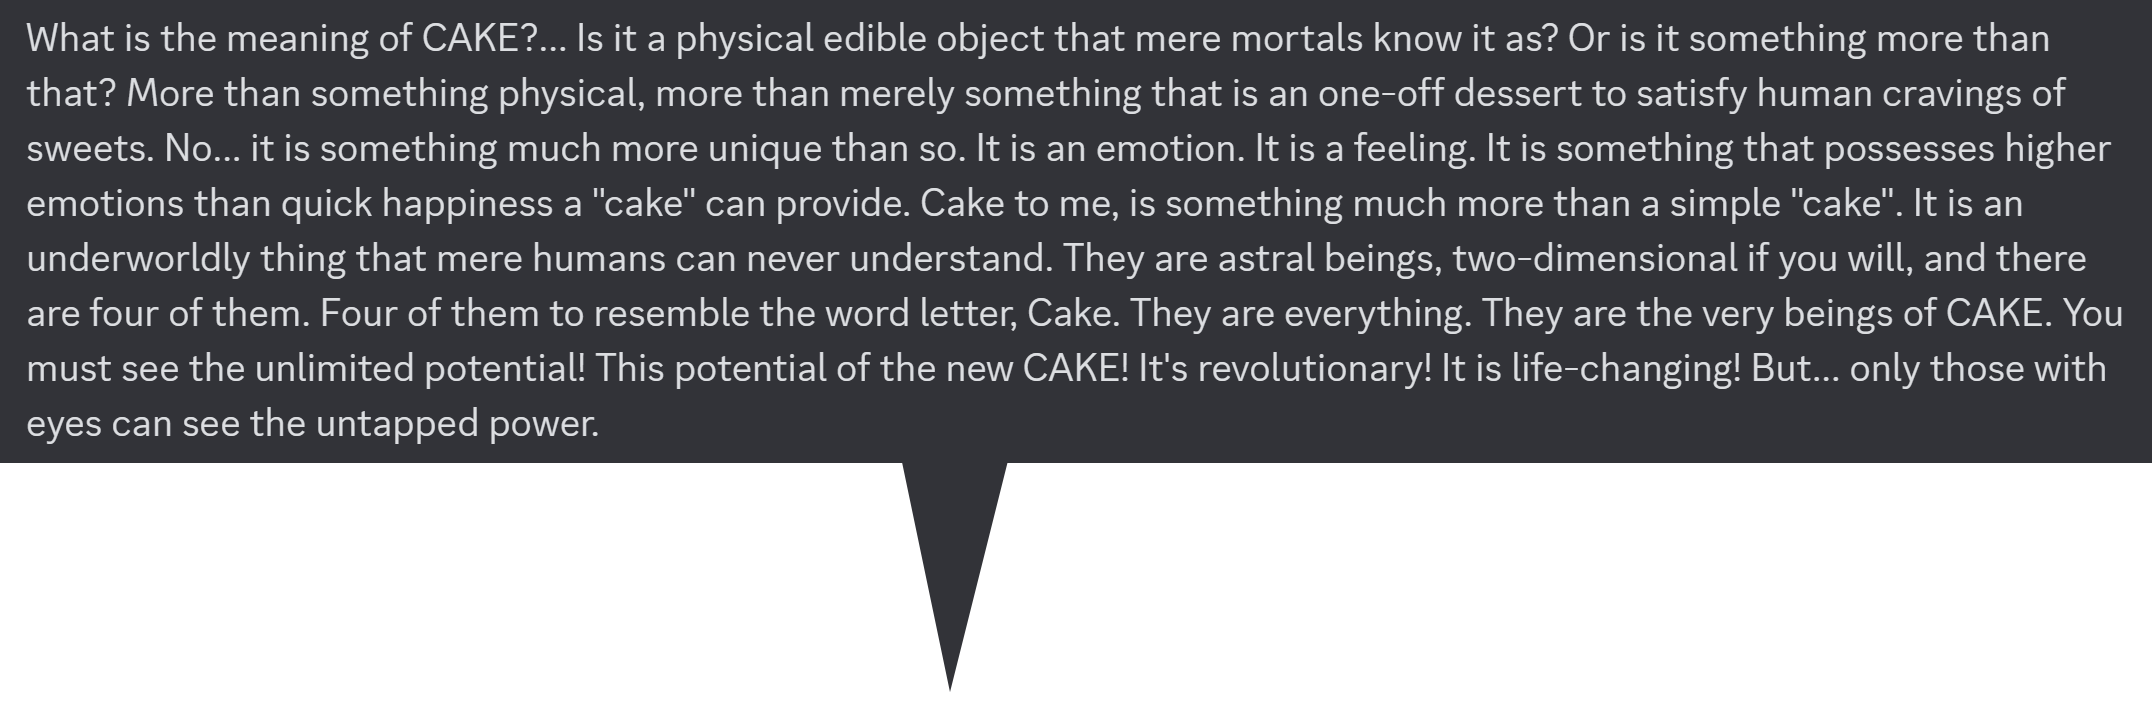 the_meaning_of_cake.png